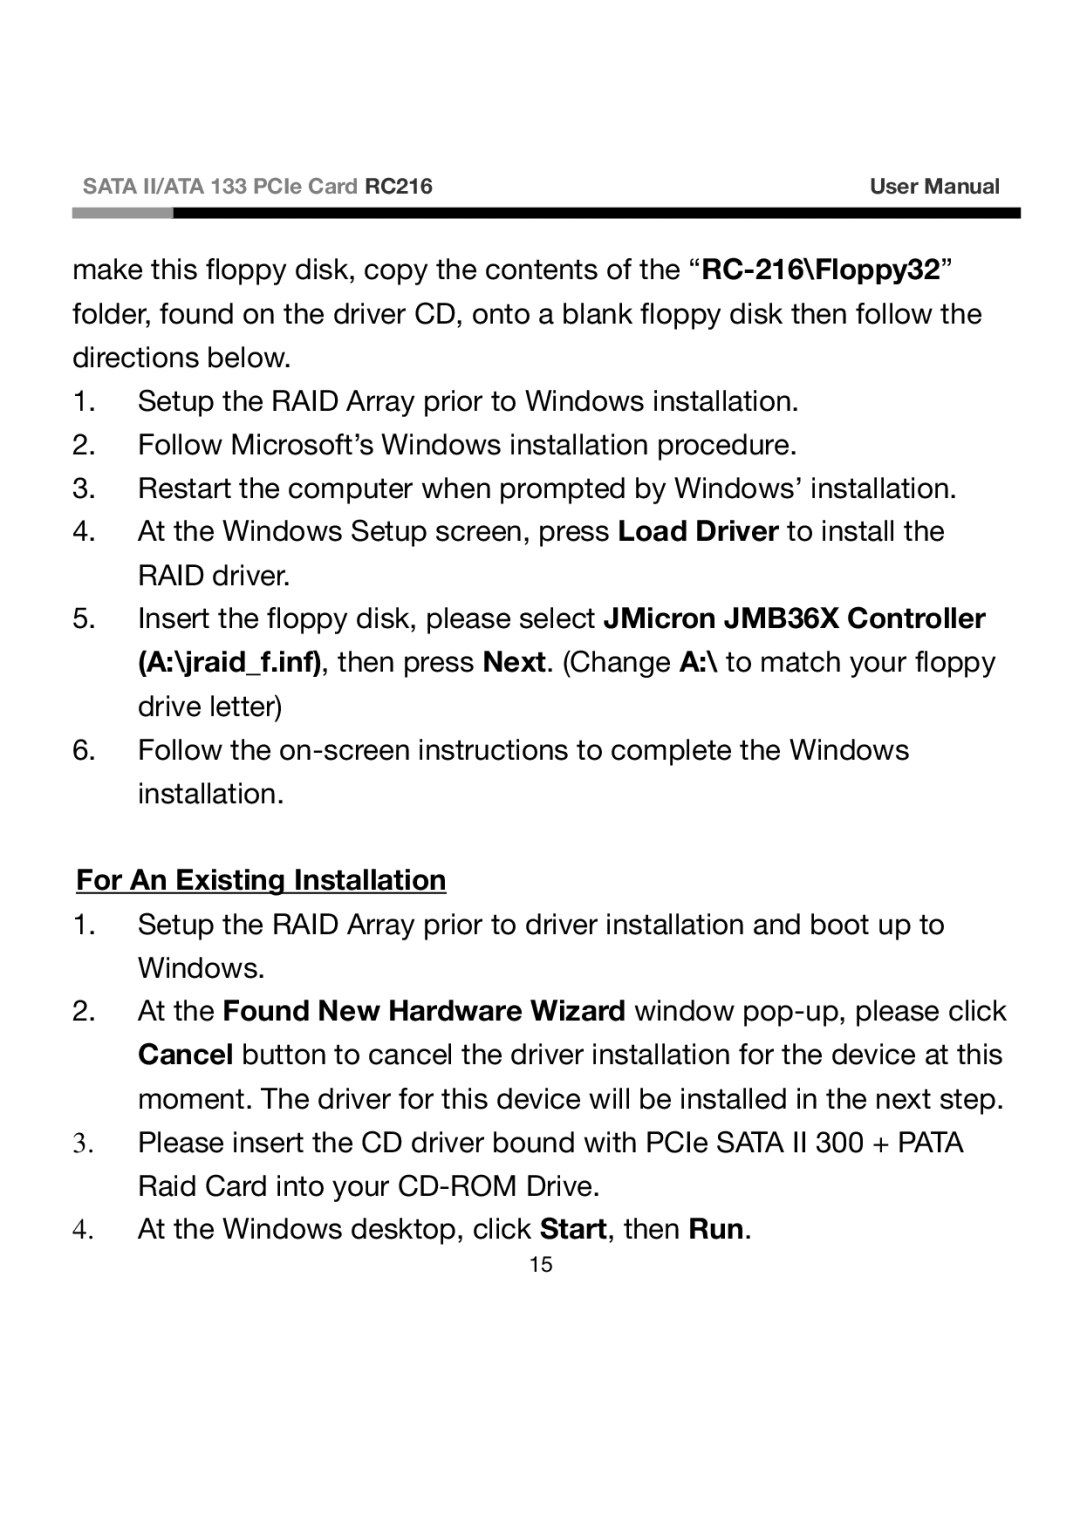 Rosewill RC216 user manual For An Existing Installation 